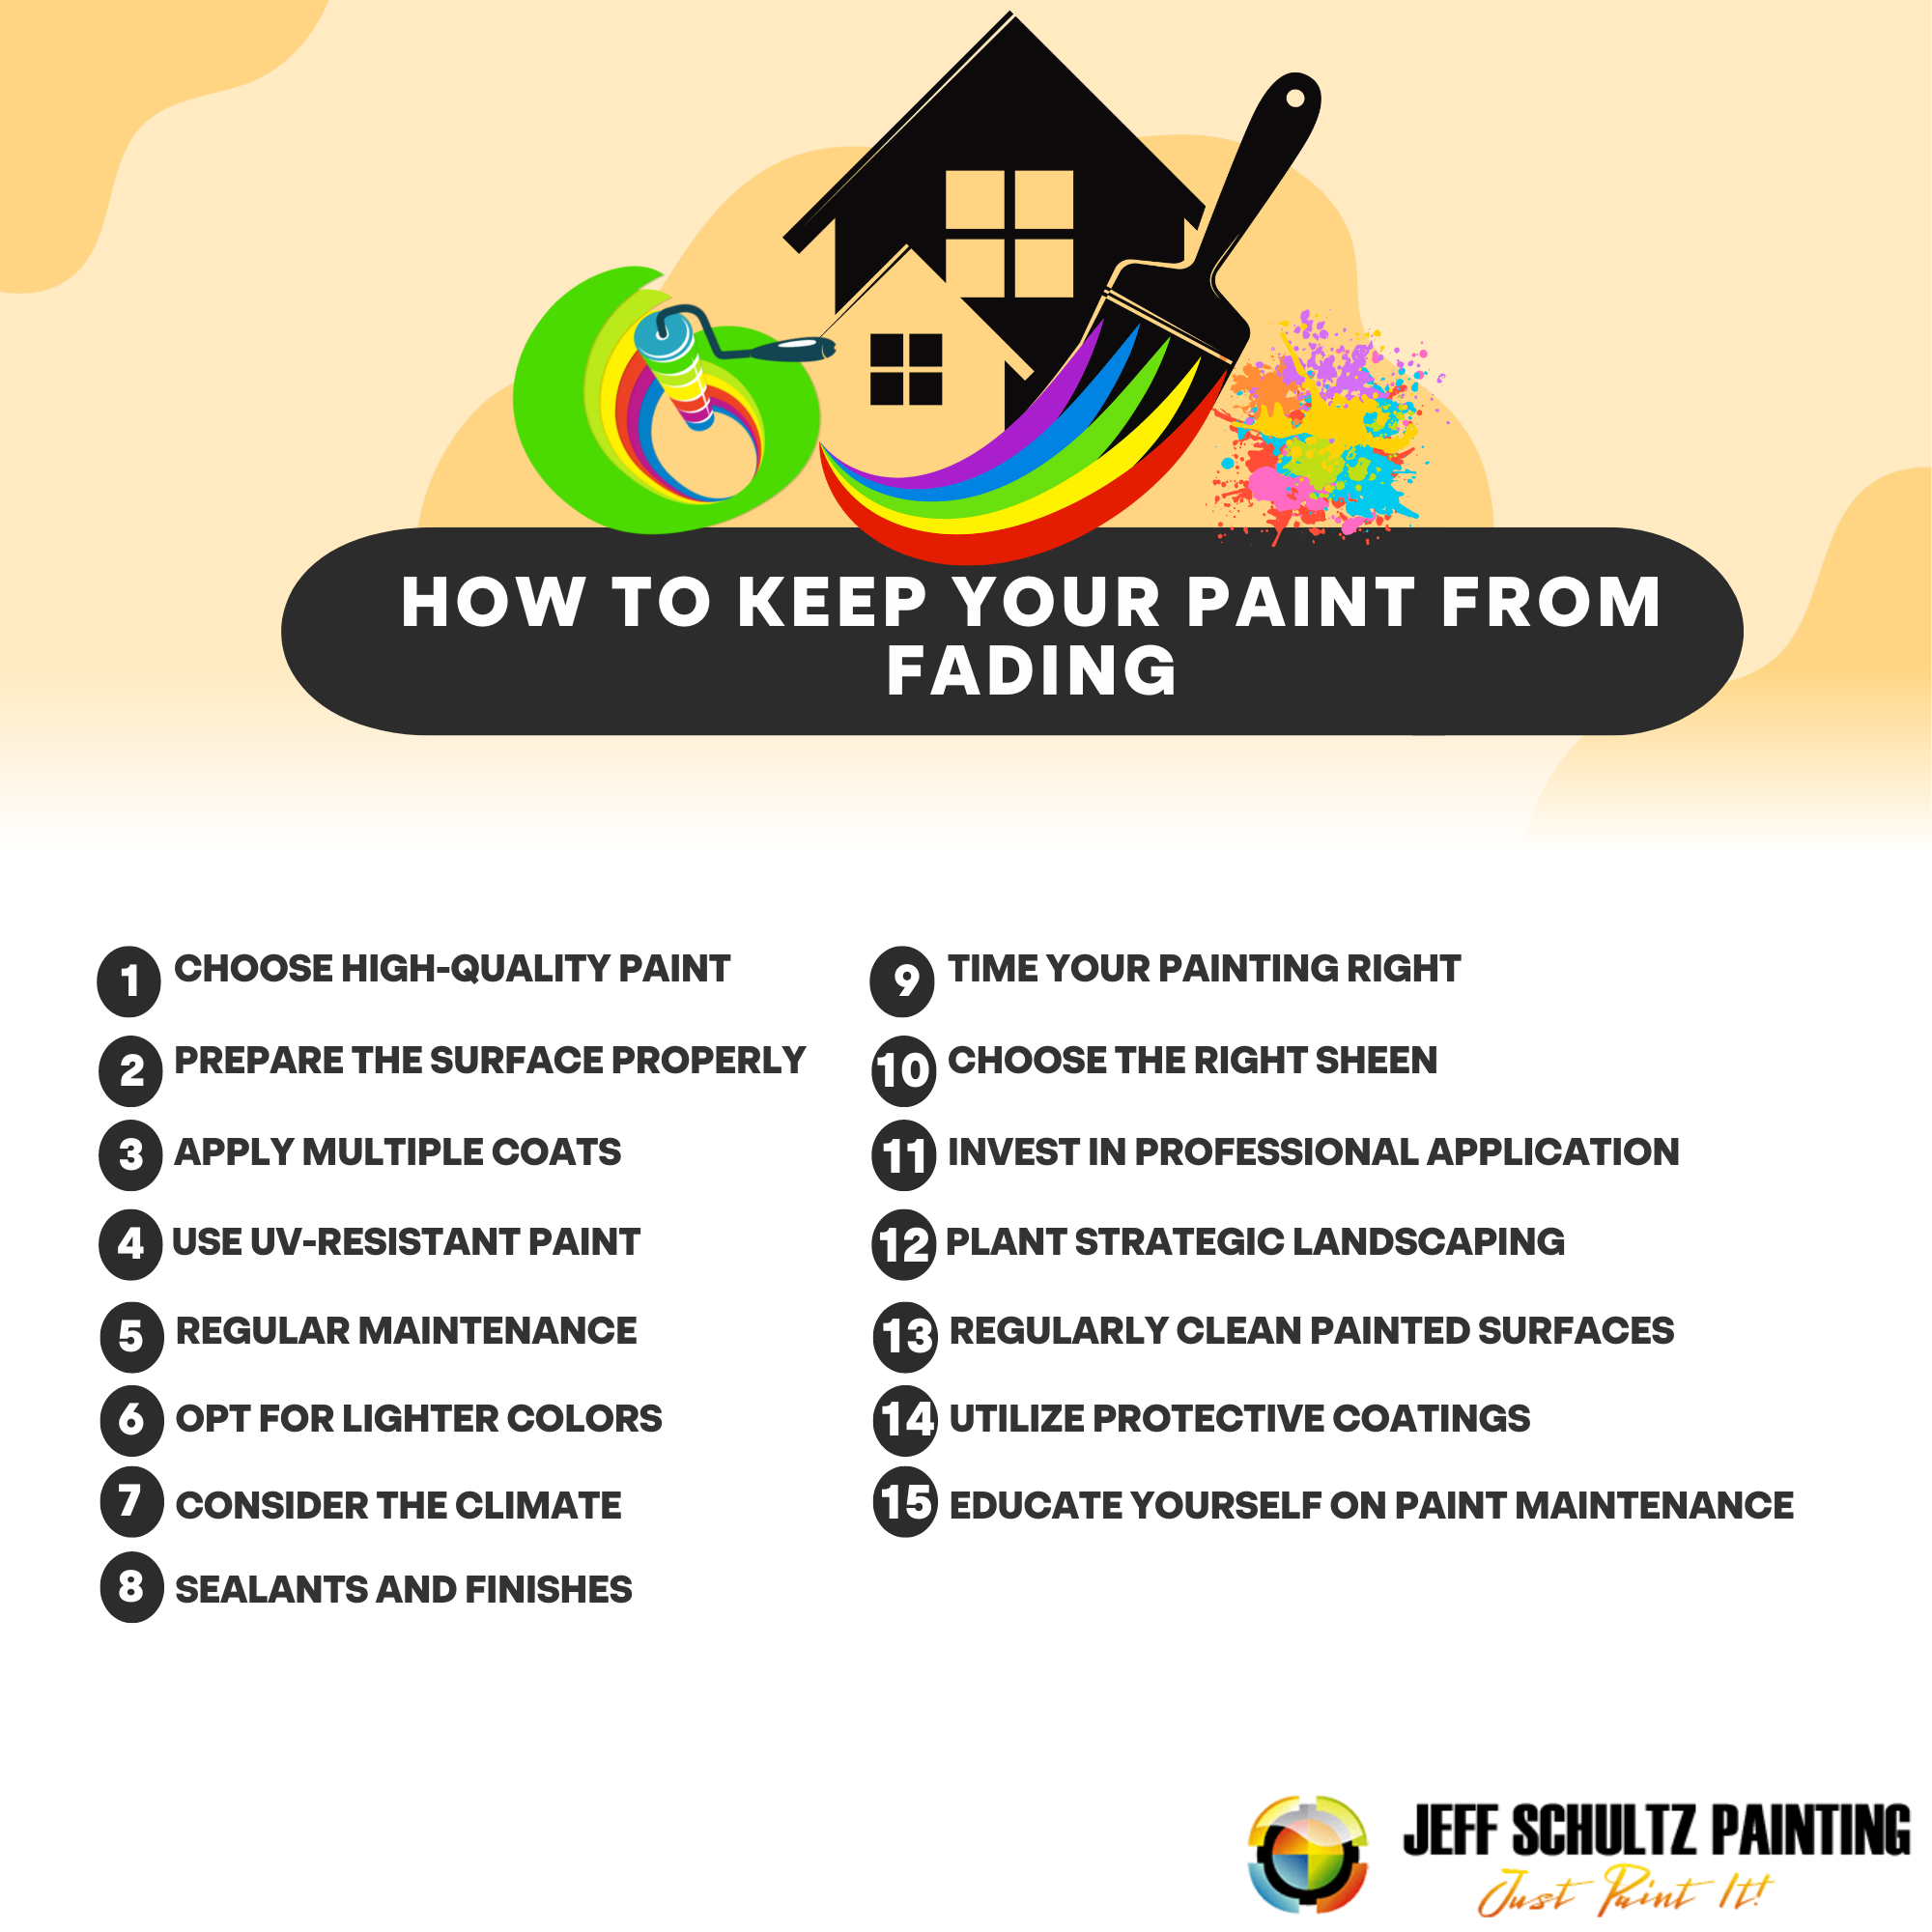 How to Keep Your Paint from Fading